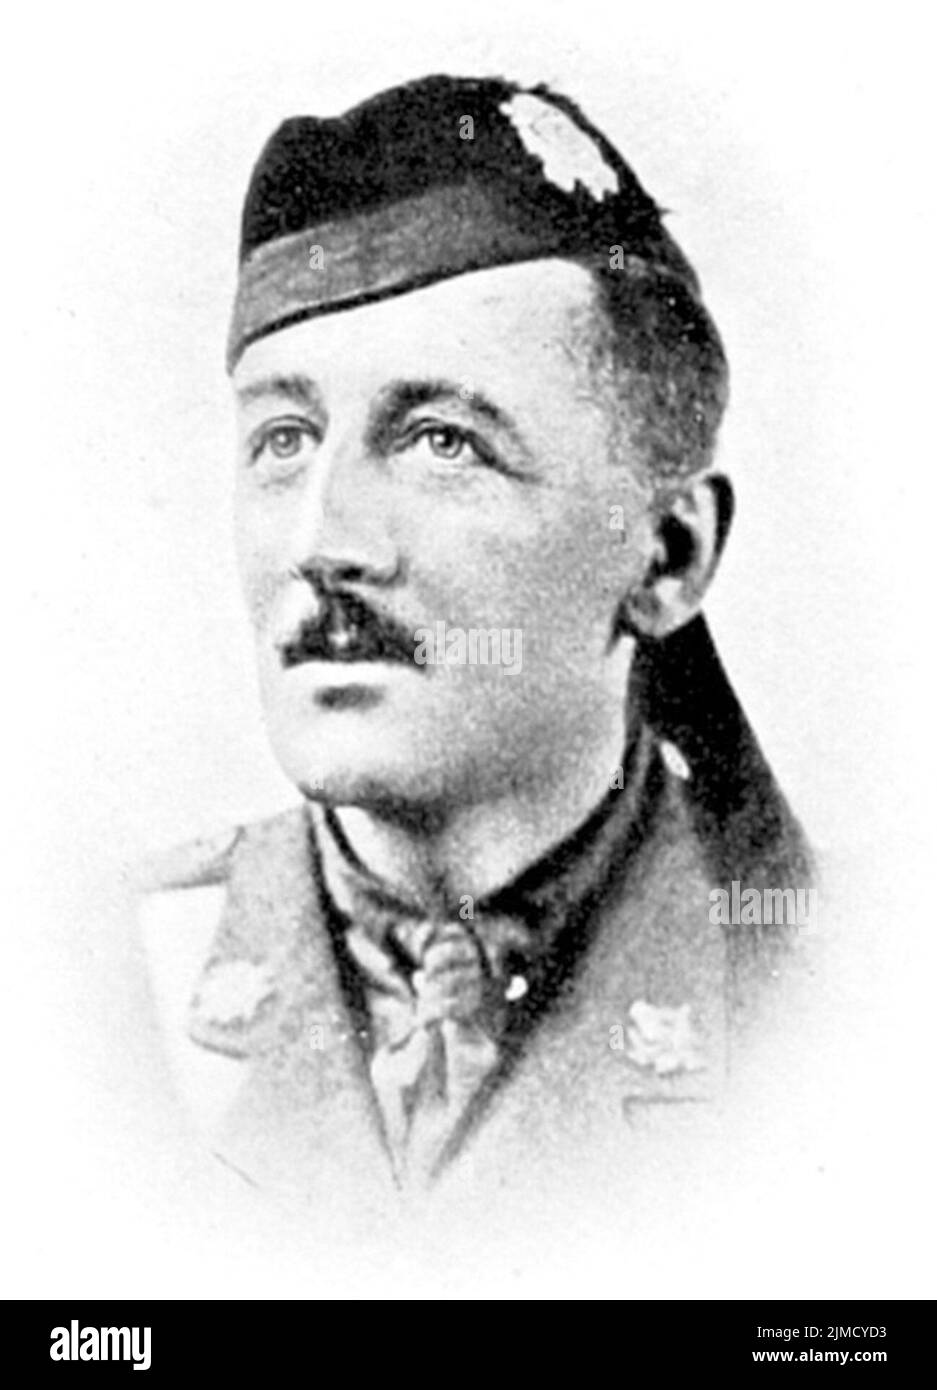 William Herbert Anderson VC, who an acting lieutenant colonel in the British Army, in the 12th (S) Battalion, The Highland Light Infantry, during the First World War, and was awarded the VC for his actions on 25 March 1918 at Bois Favieres, near Maricourt, France. Stock Photo